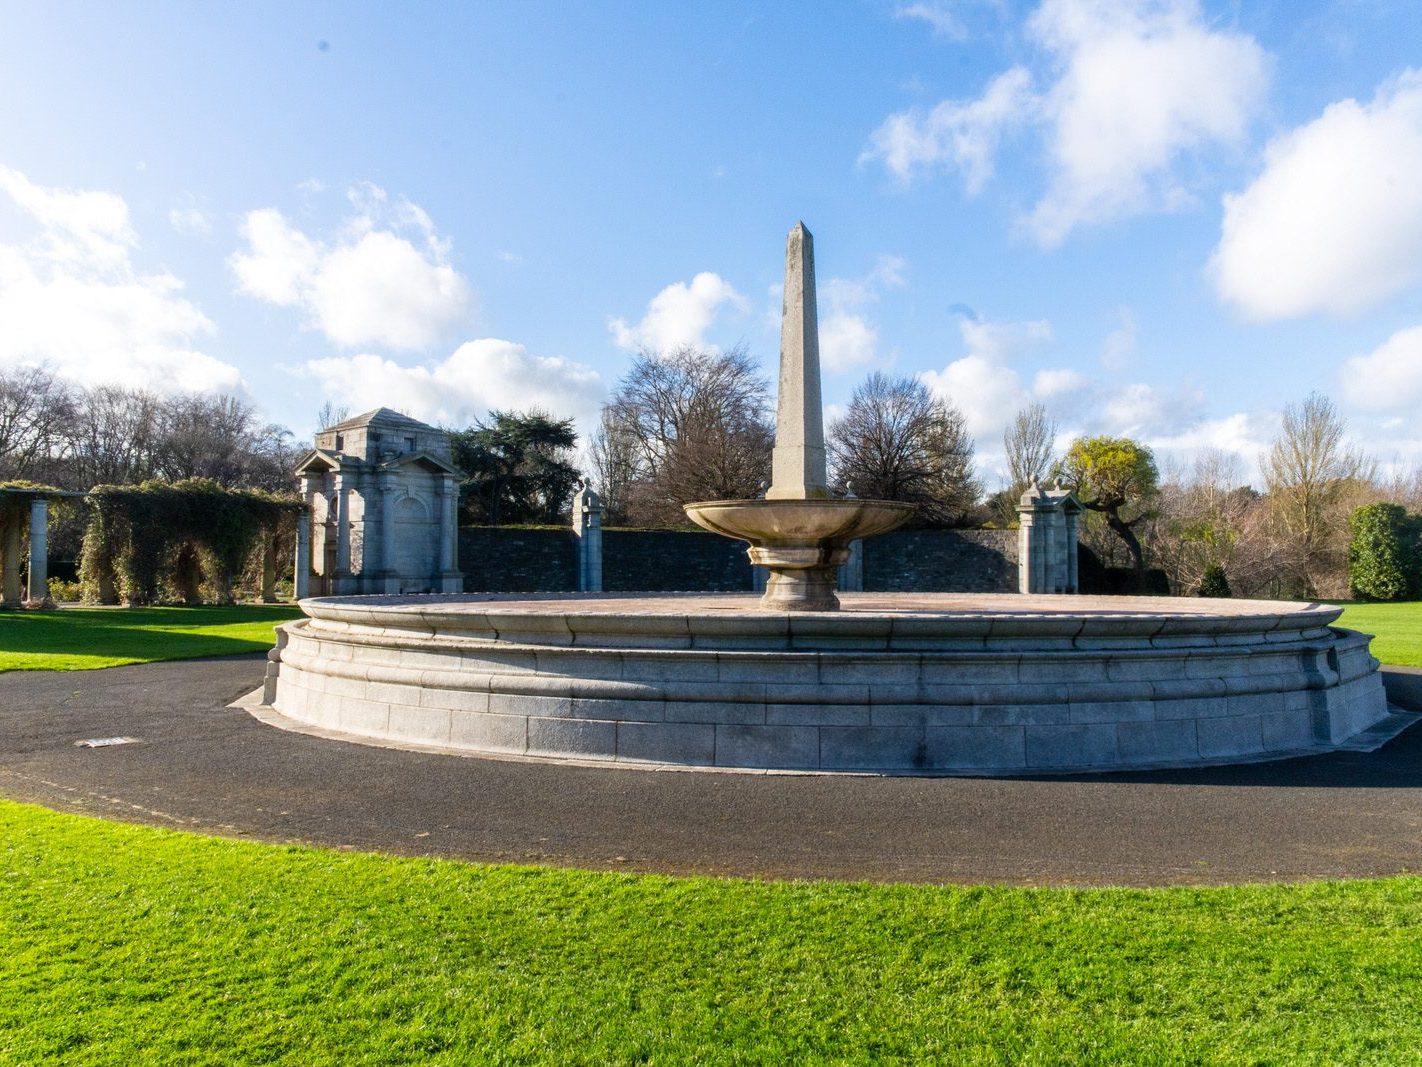 TODAY I VISITED THE IRISH NATIONAL WAR MEMORIAL GARDENS [ON THE SOUTH BANK OF THE RIVER LIFFEY]-223122-1